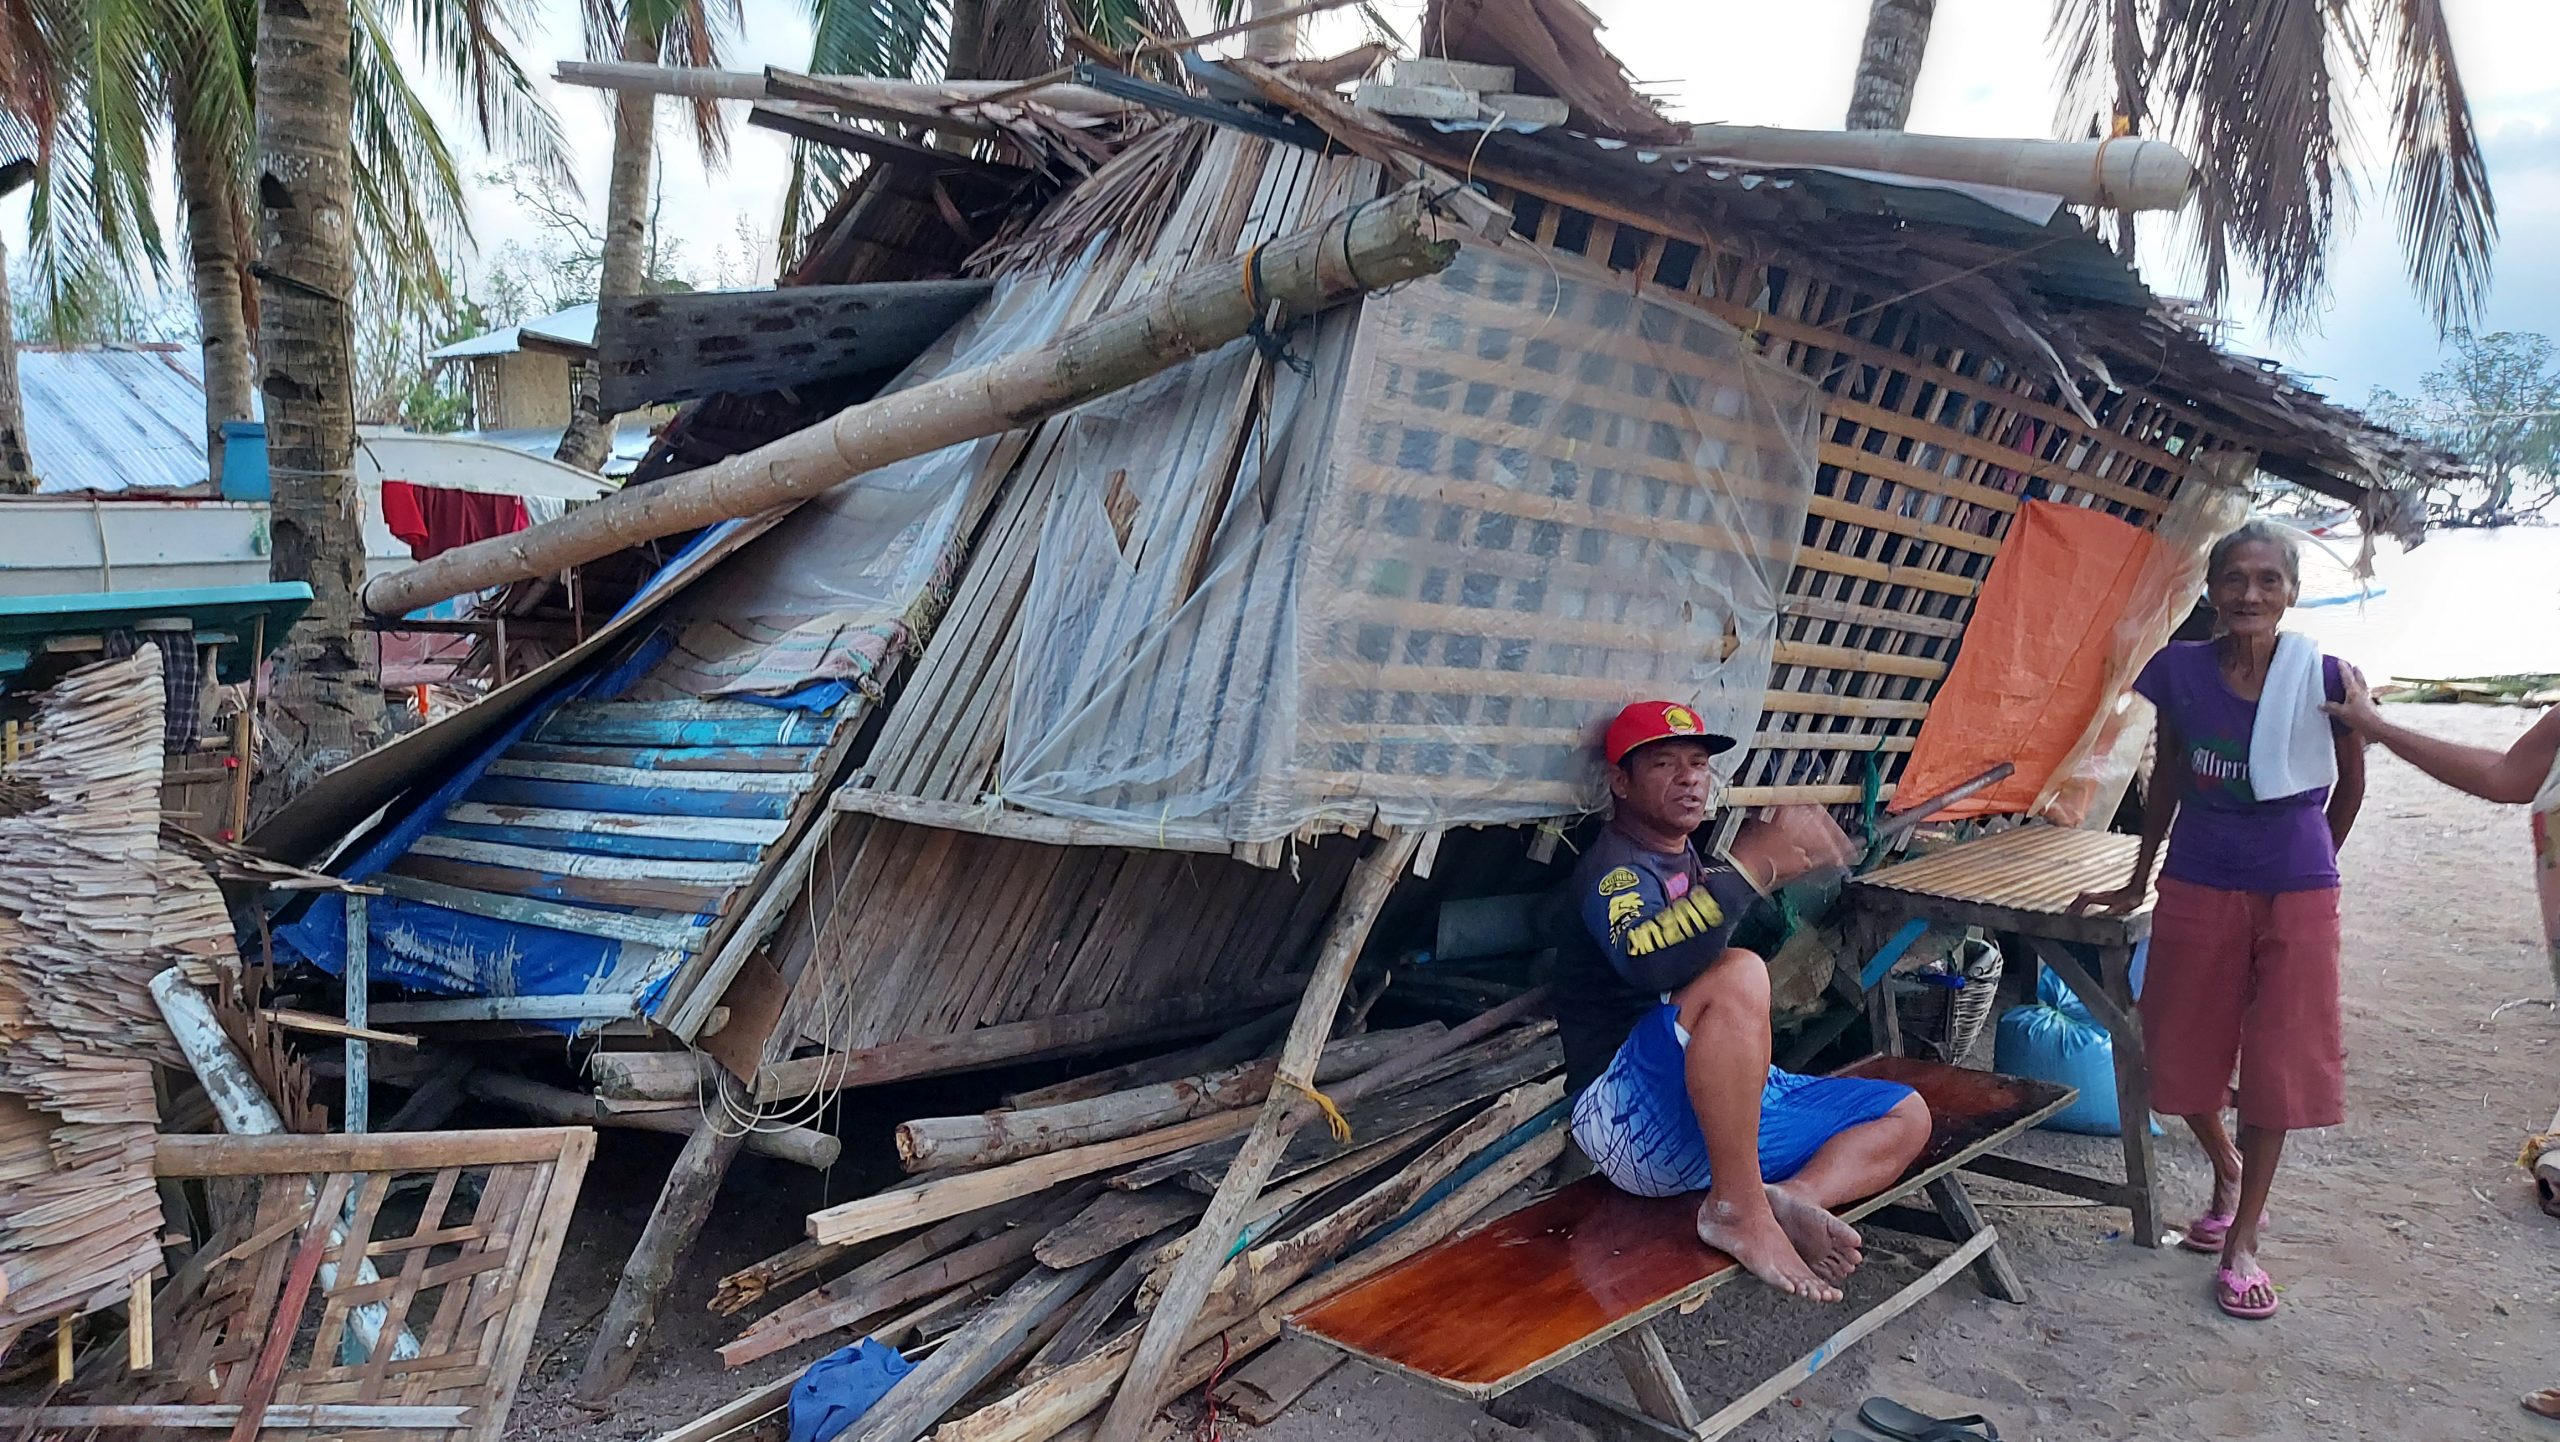 A woman with a disability lives alone in this mostly destroyed house.